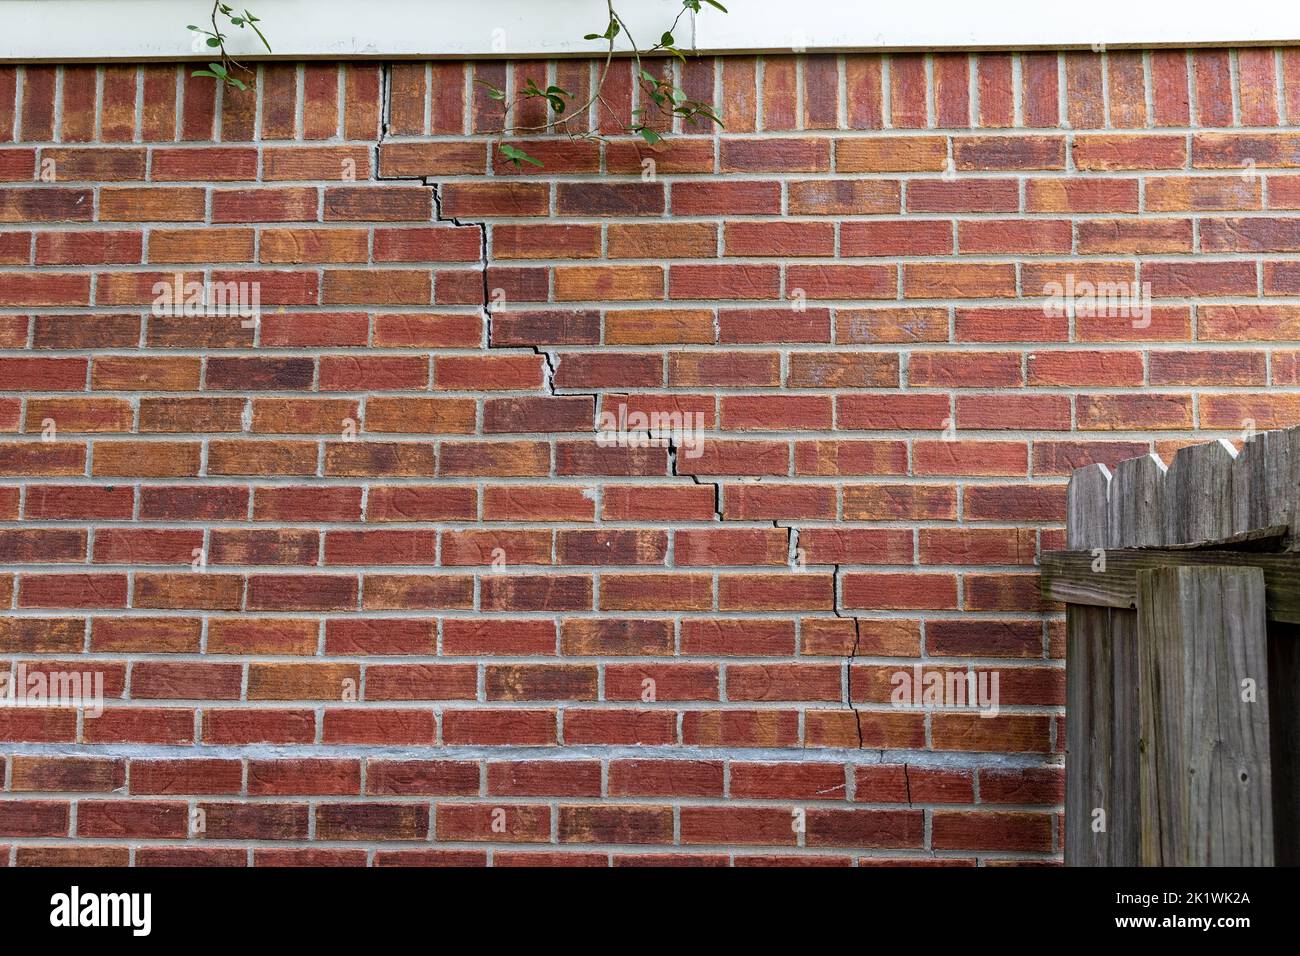 Crack in bricks of home from foundation problems Stock Photo